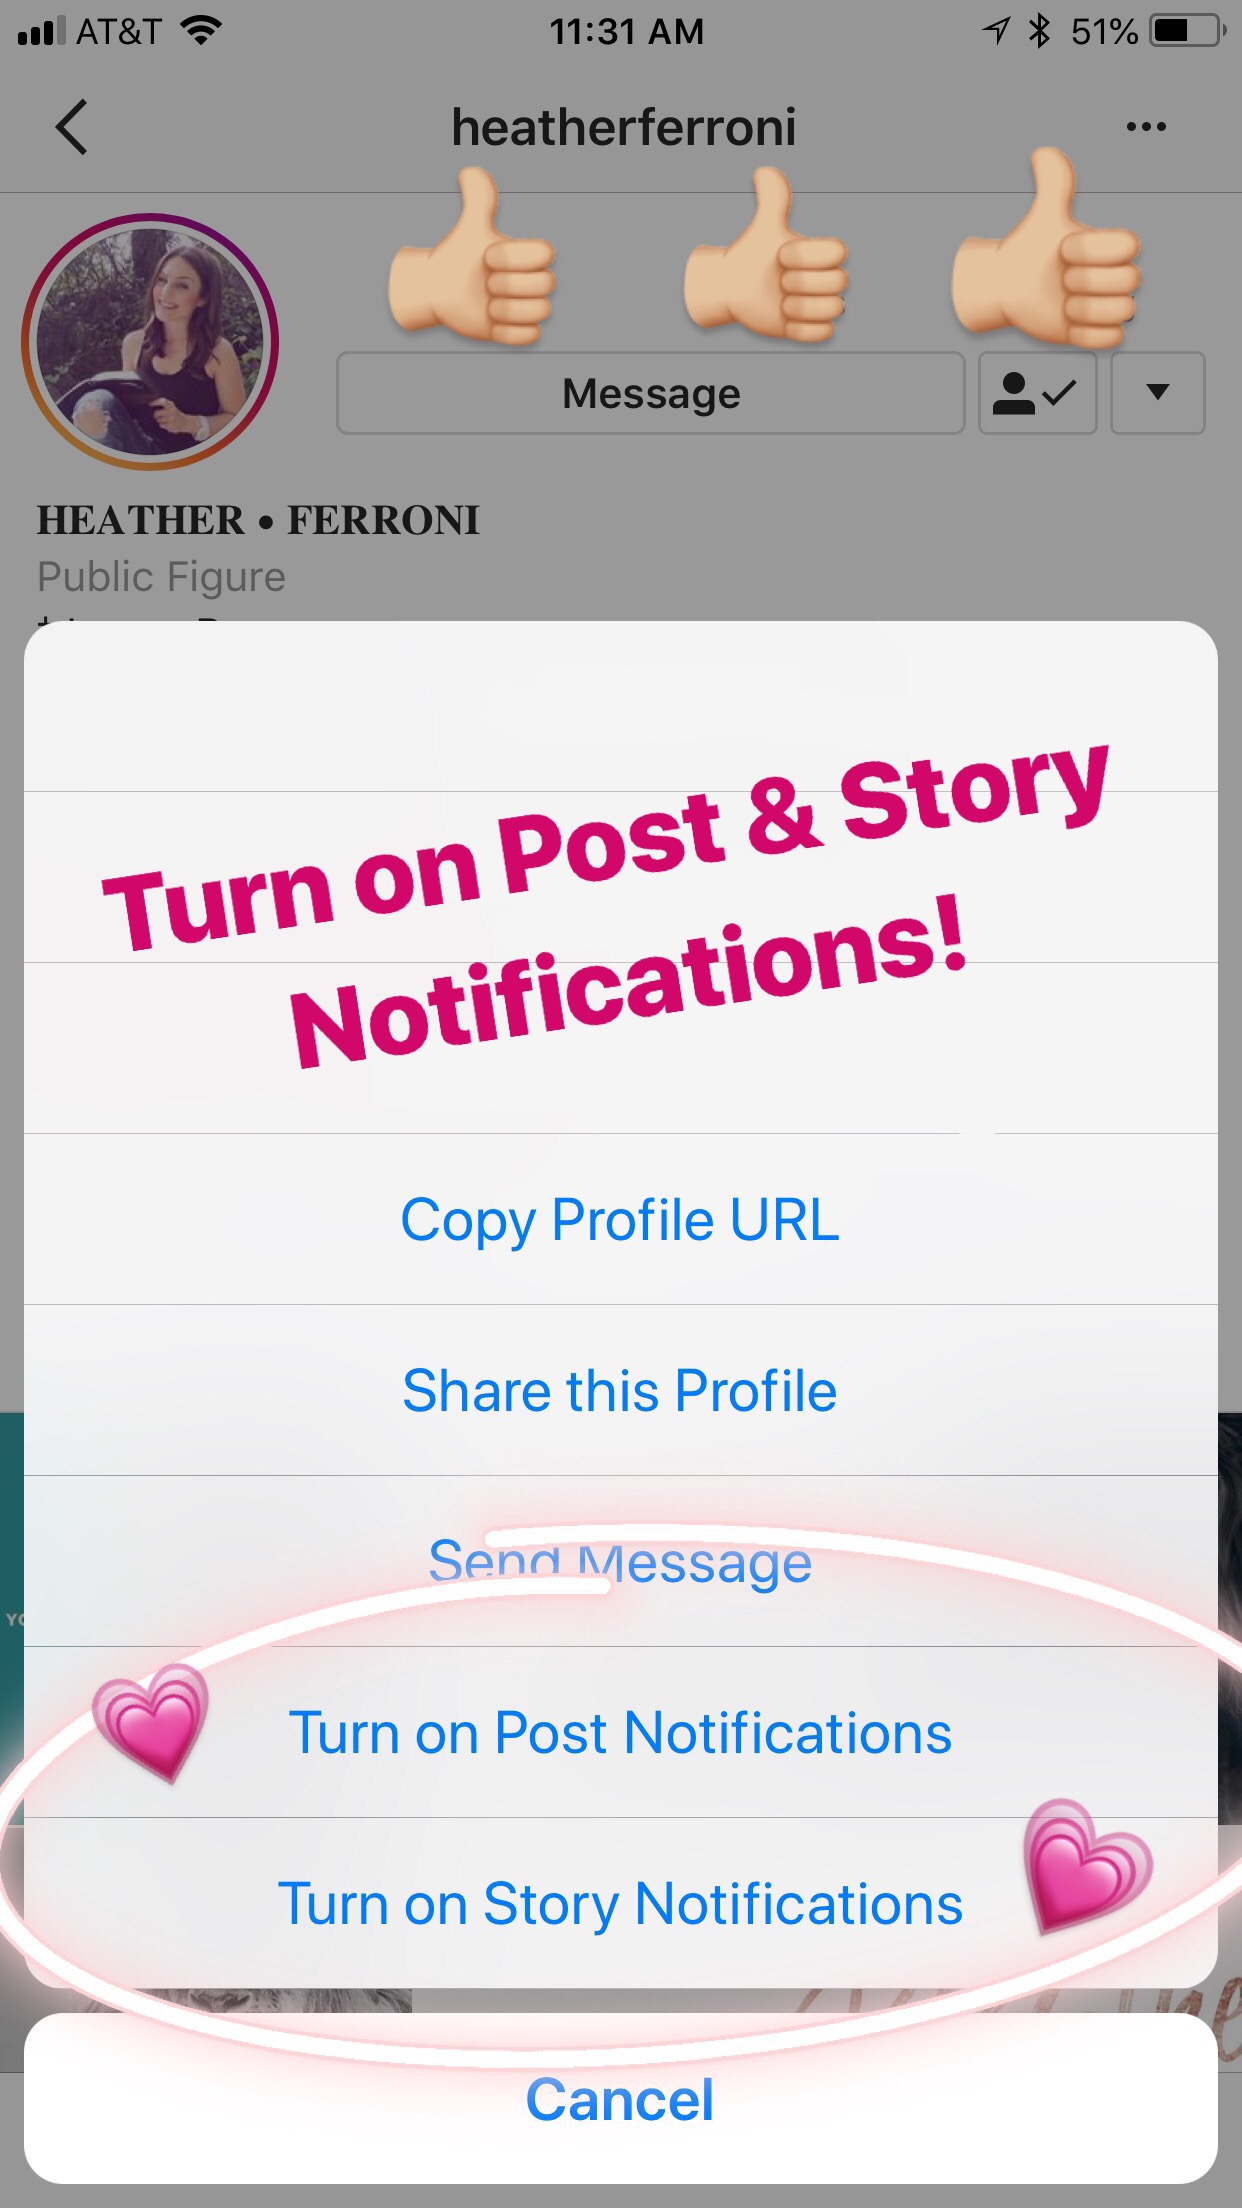 Turning on Post & Story Notifications